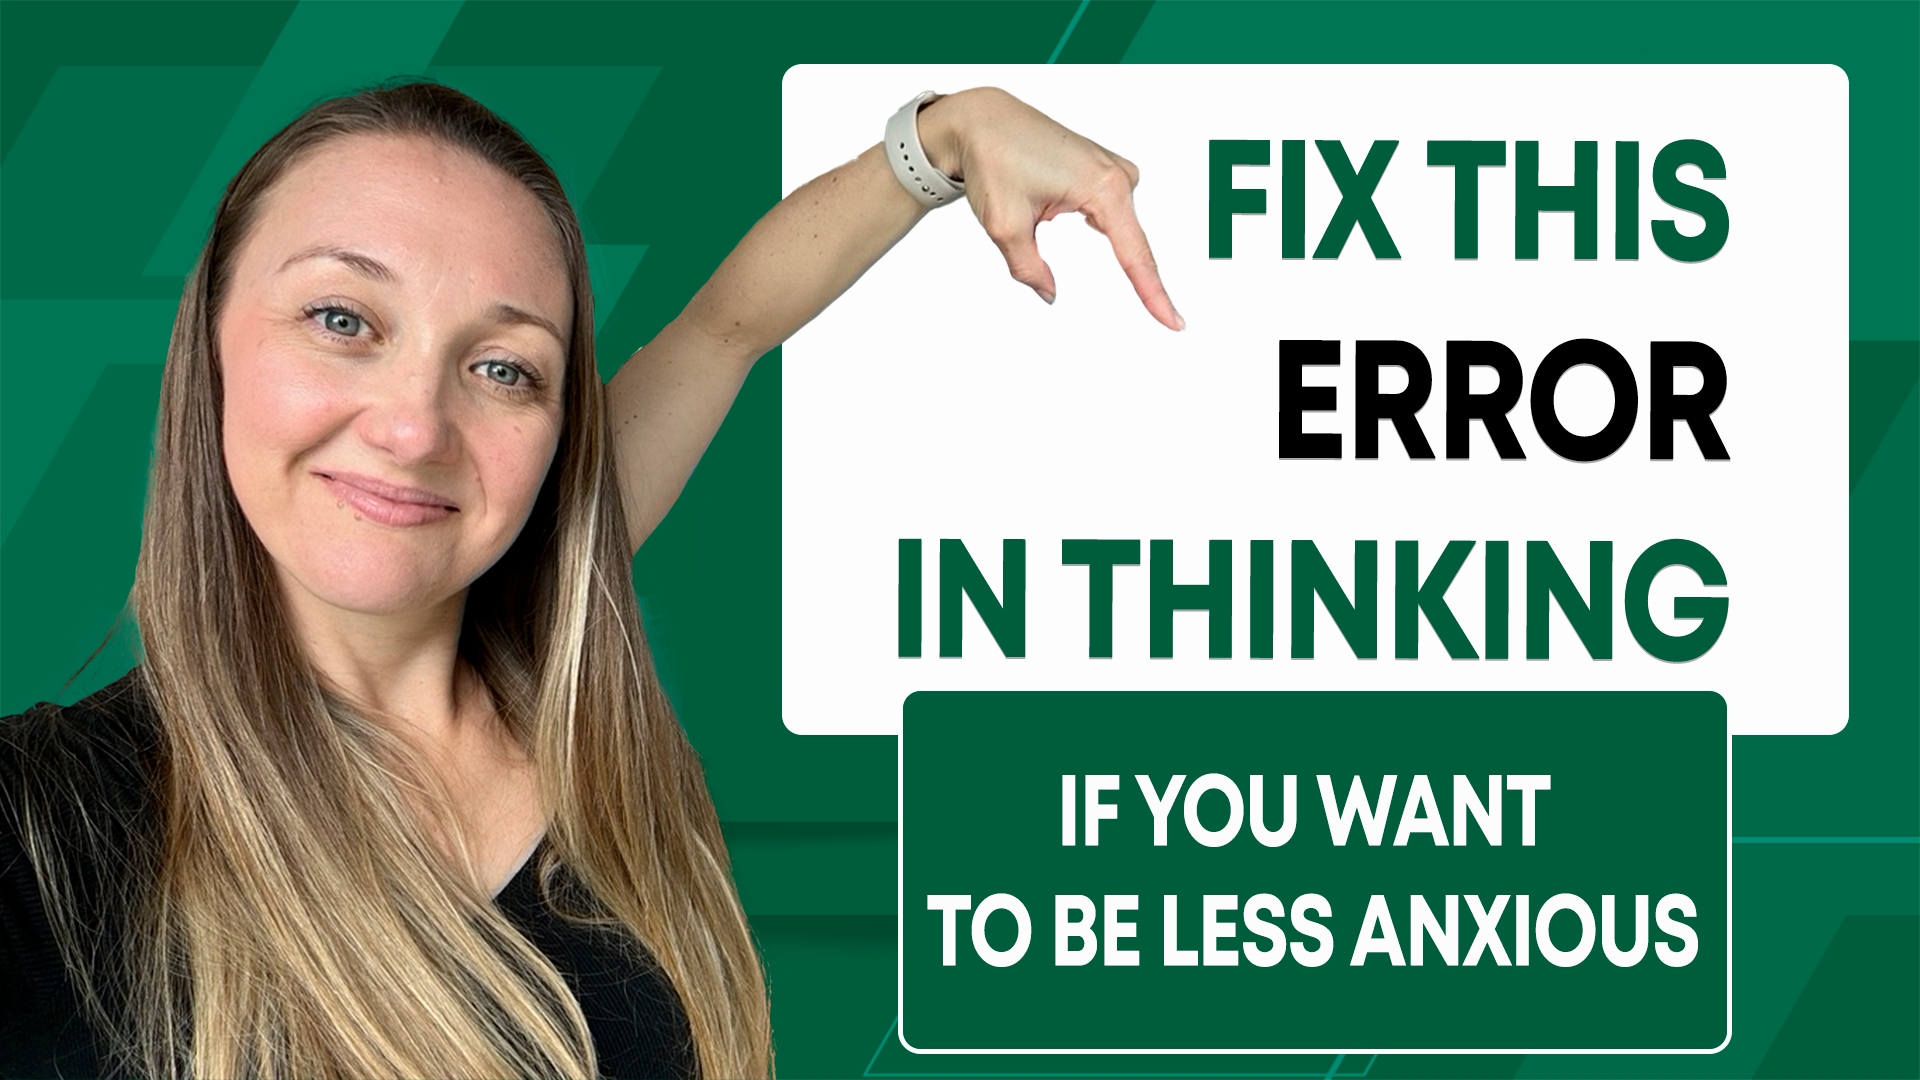 EP 379 Fix this Error in Thinking (if you want to be less anxious)